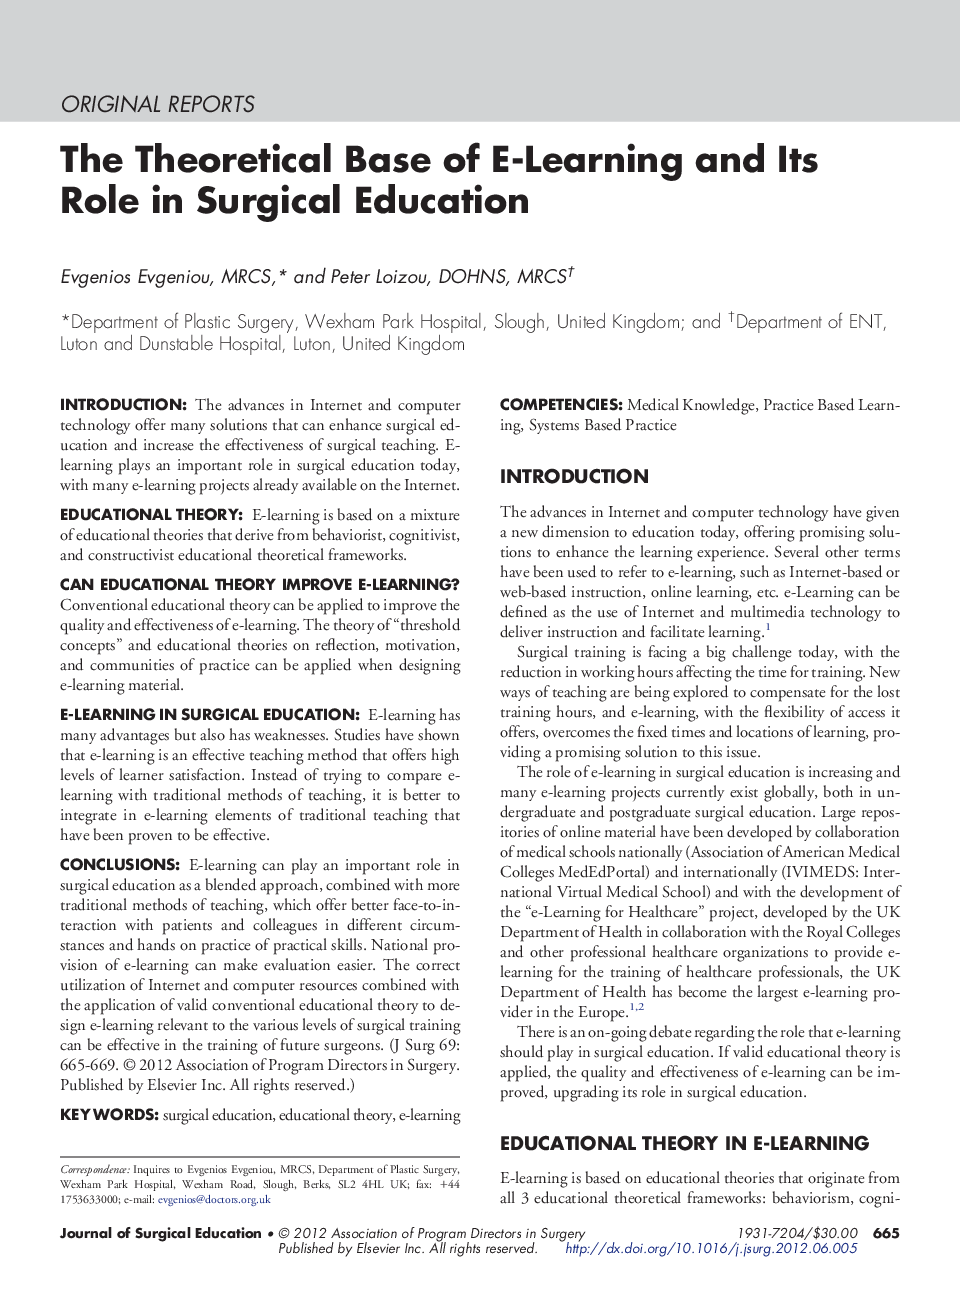 The Theoretical Base of E-Learning and Its Role in Surgical Education